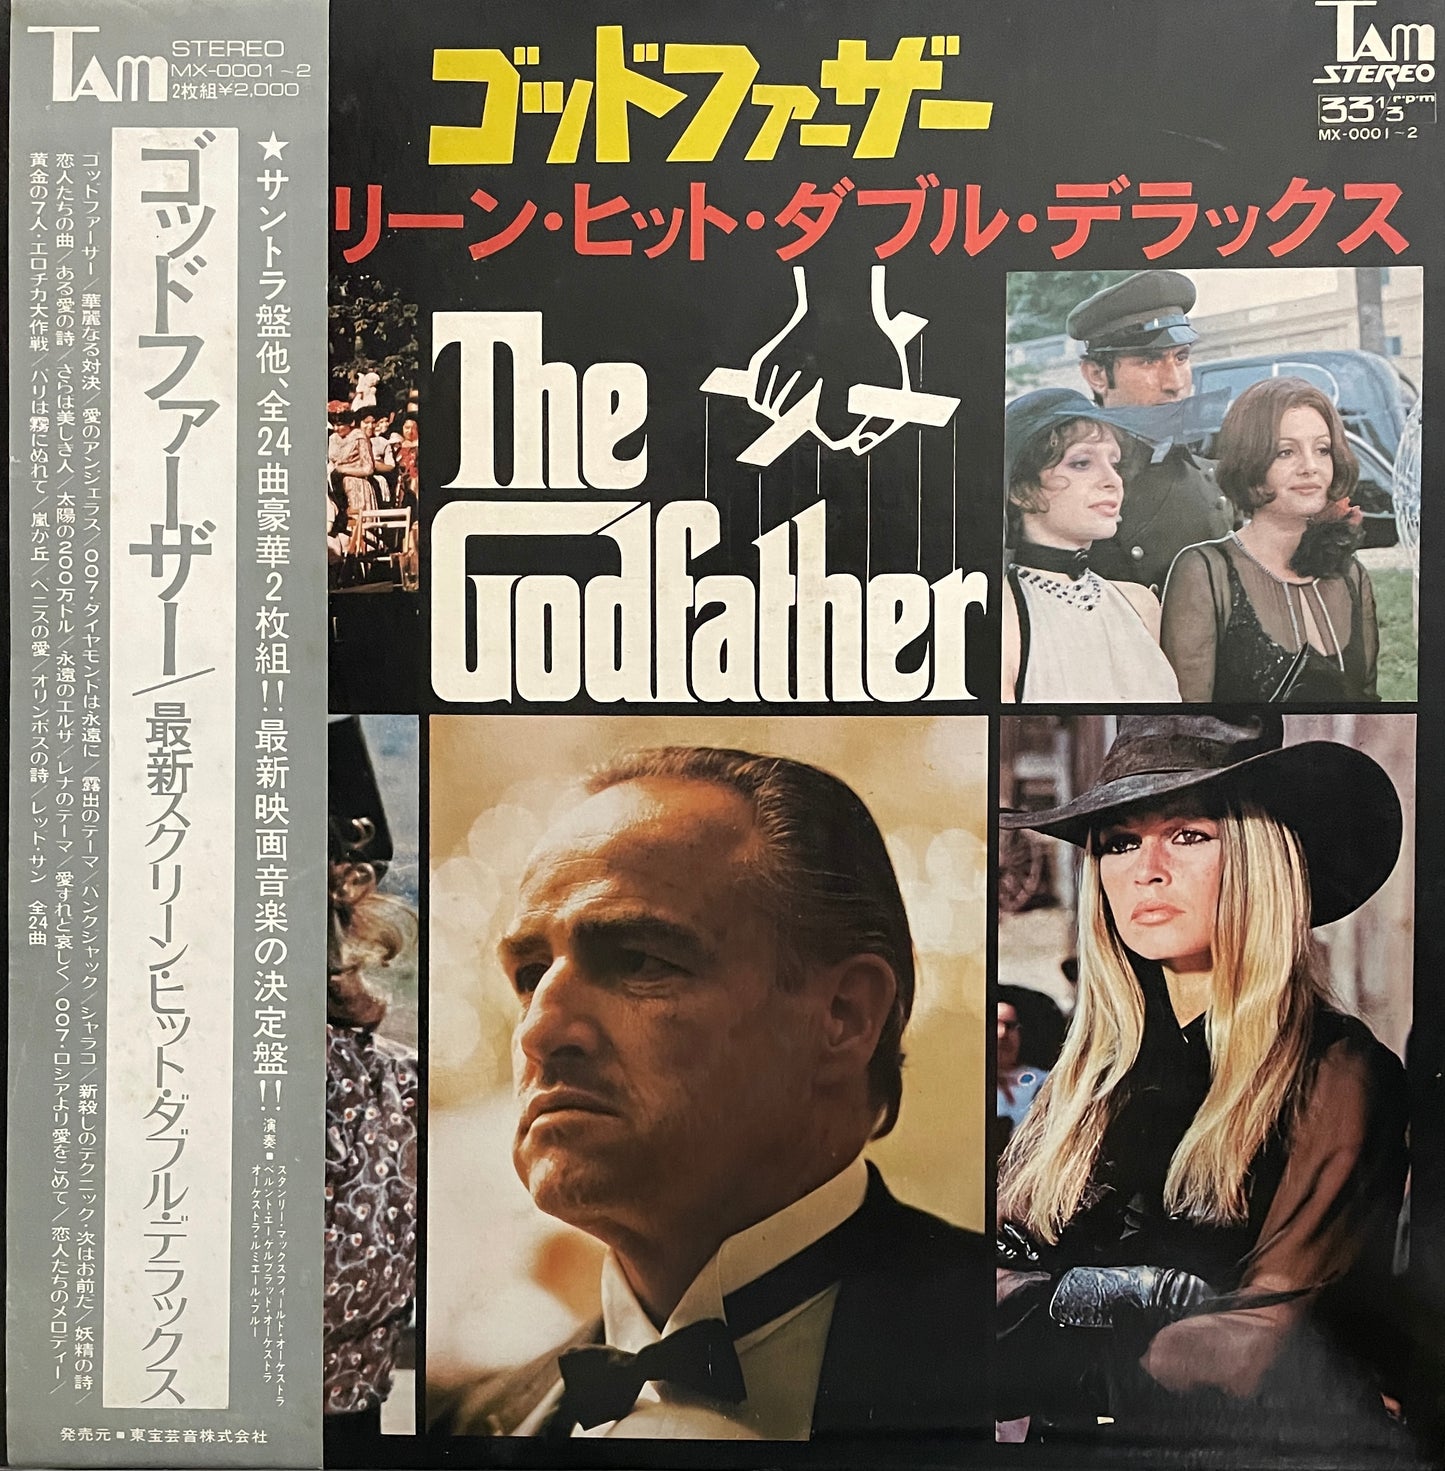 Stanley Maxfield Orchestra "The Godfather" (1972)